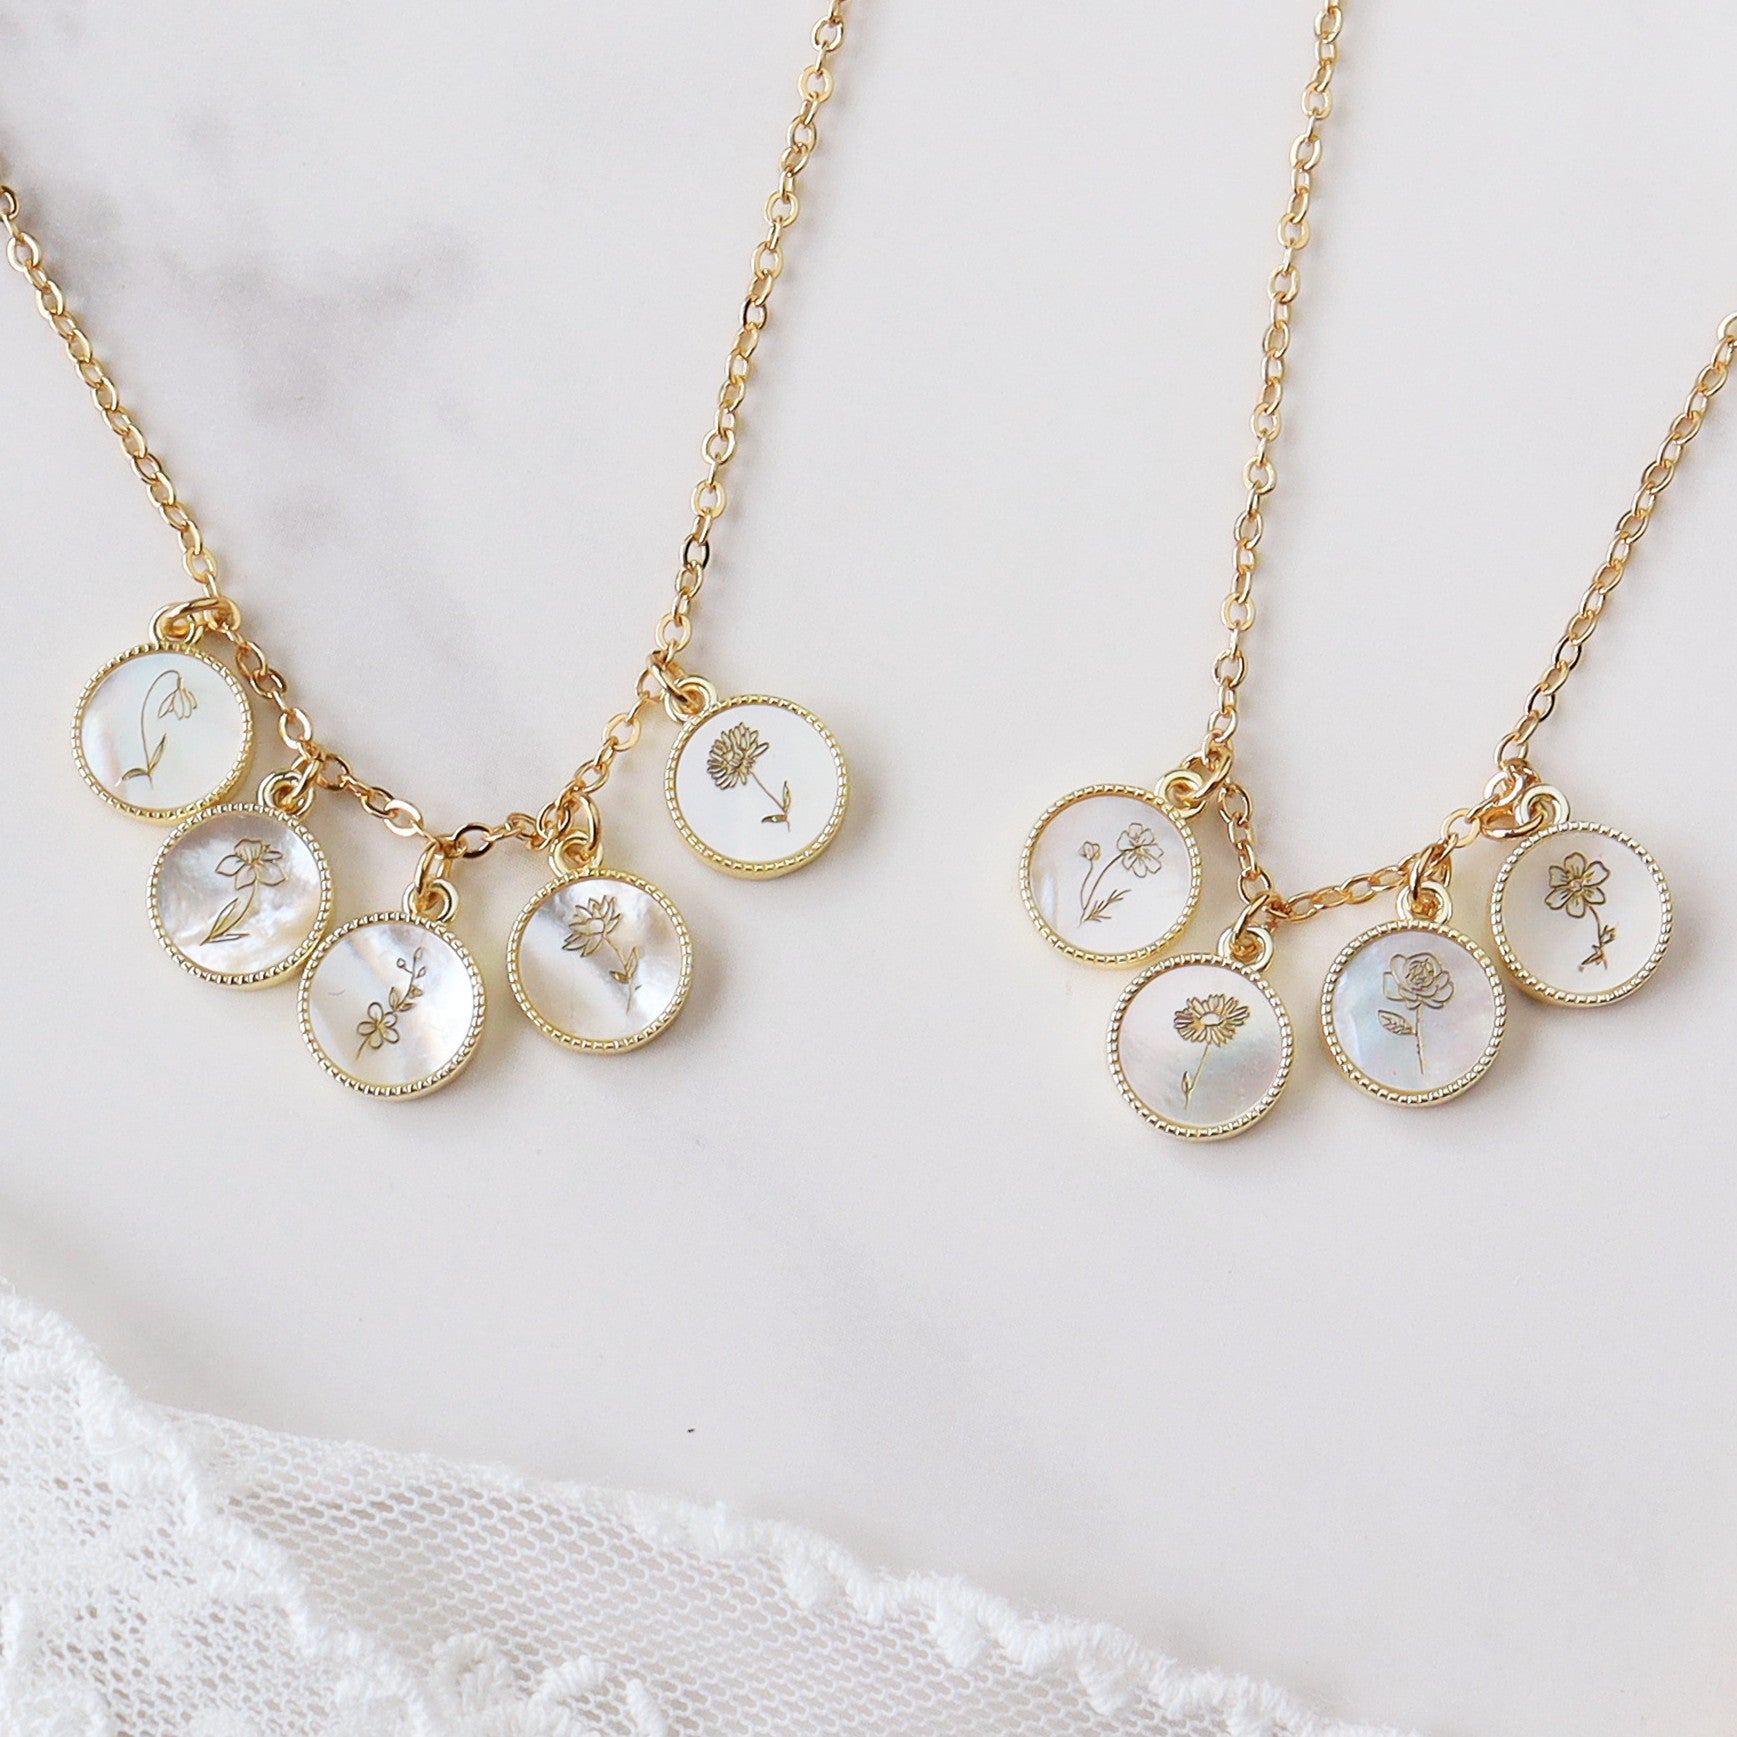 Gold Natural White Shell Carved Birthflower Necklace, PersonalizedBirth Flower Pendant Necklace Jewelry KZ046